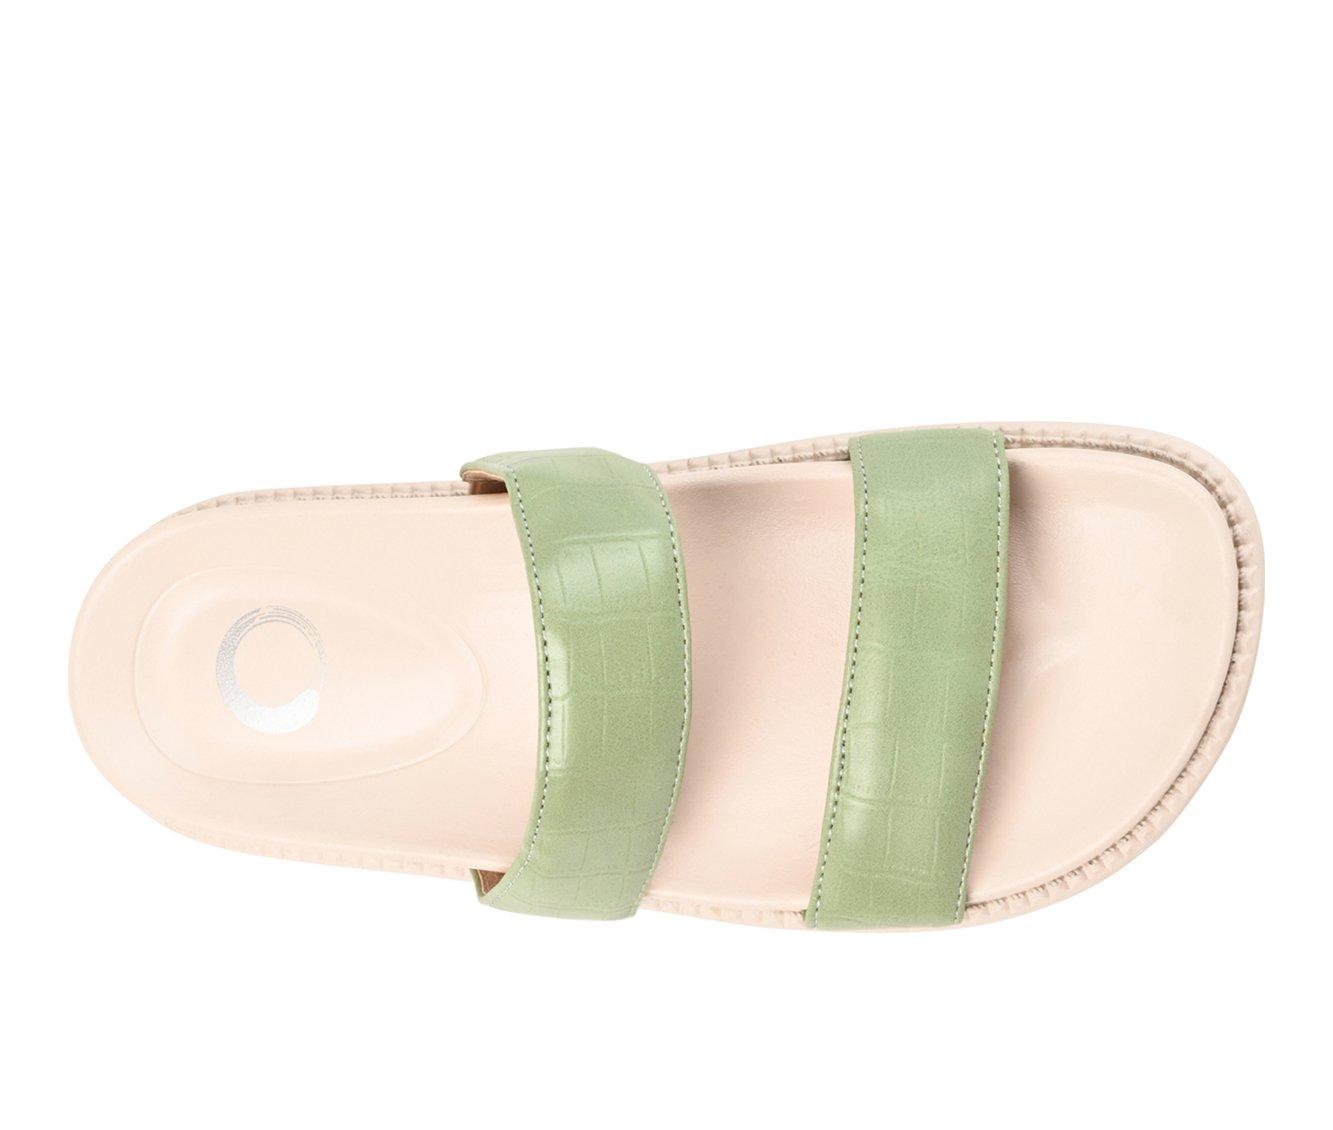 Women's Journee Collection Stellina Footbed Sandals